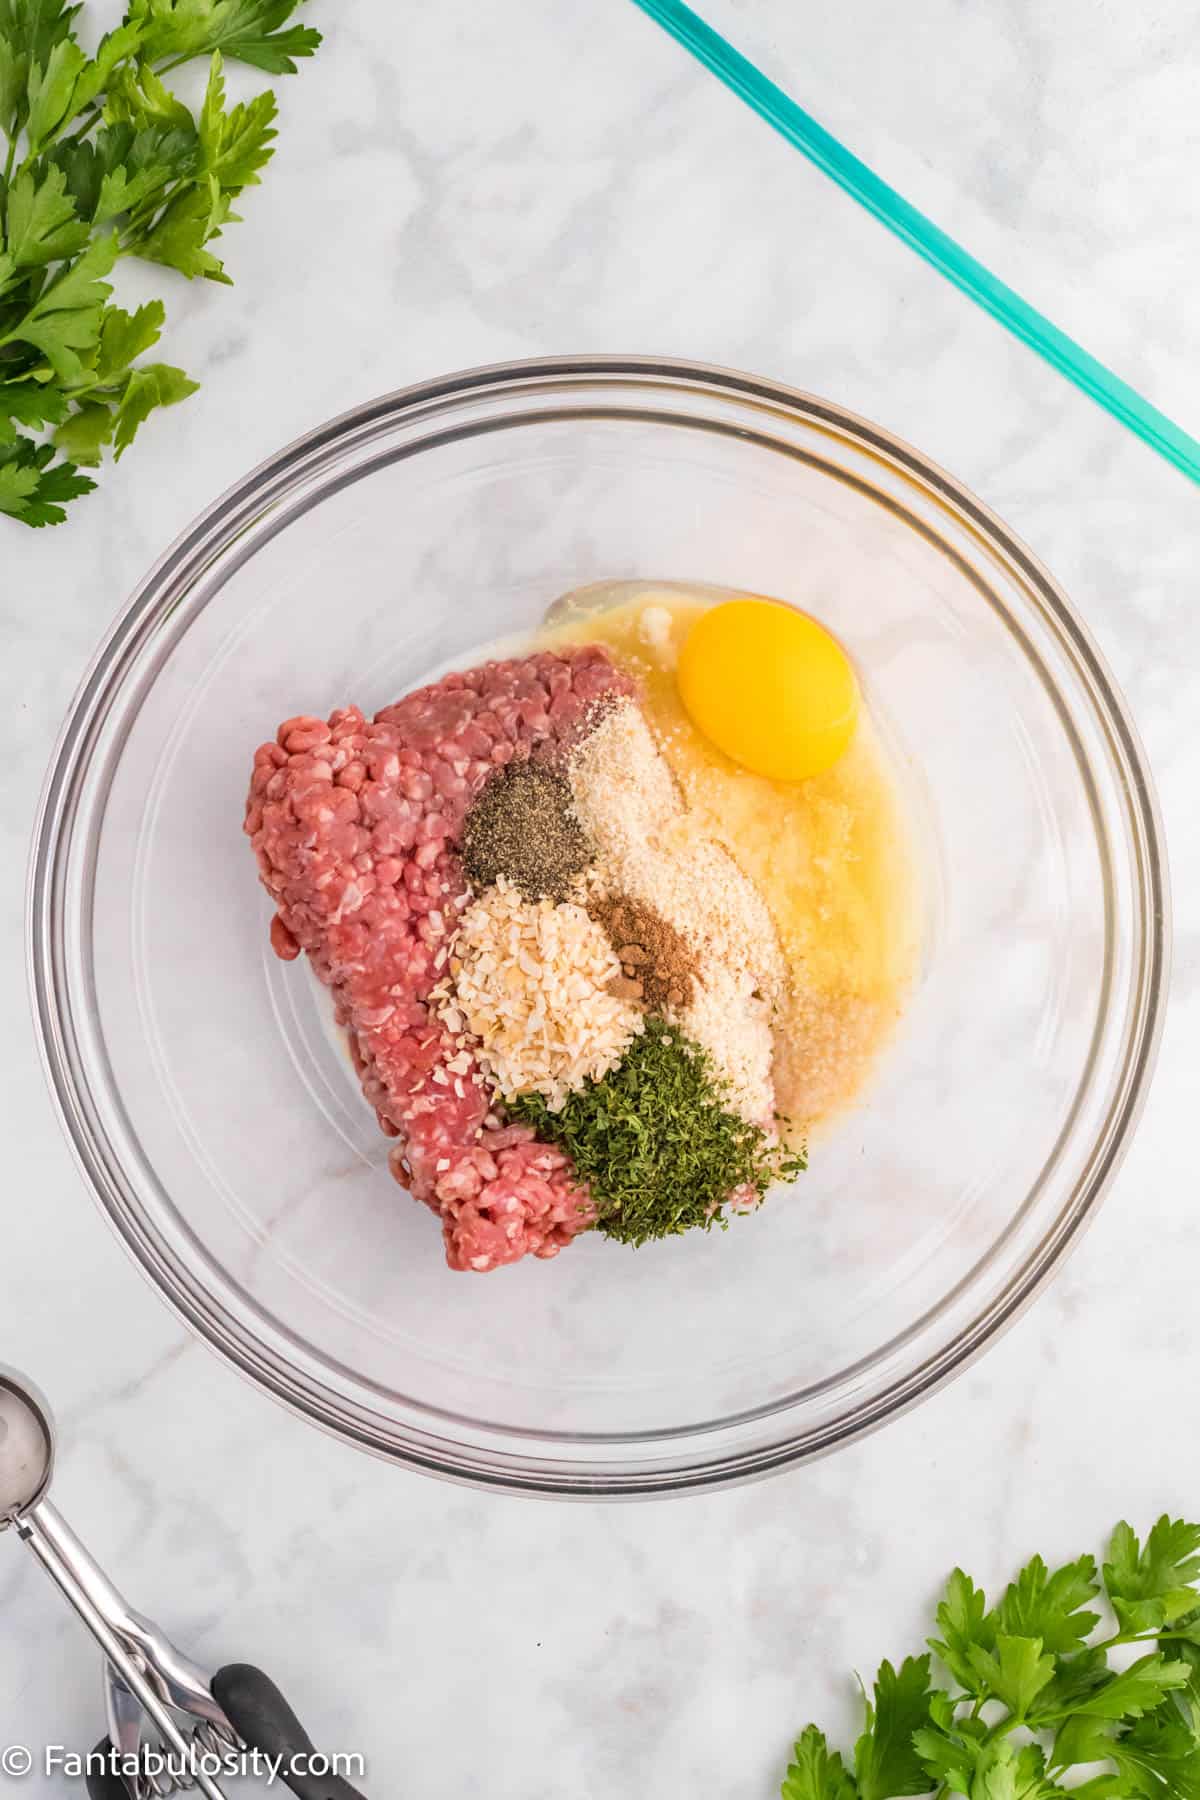 A glass mixing bowl holds ground beef, bread crumbs, an egg and spices to mix to make meatballs